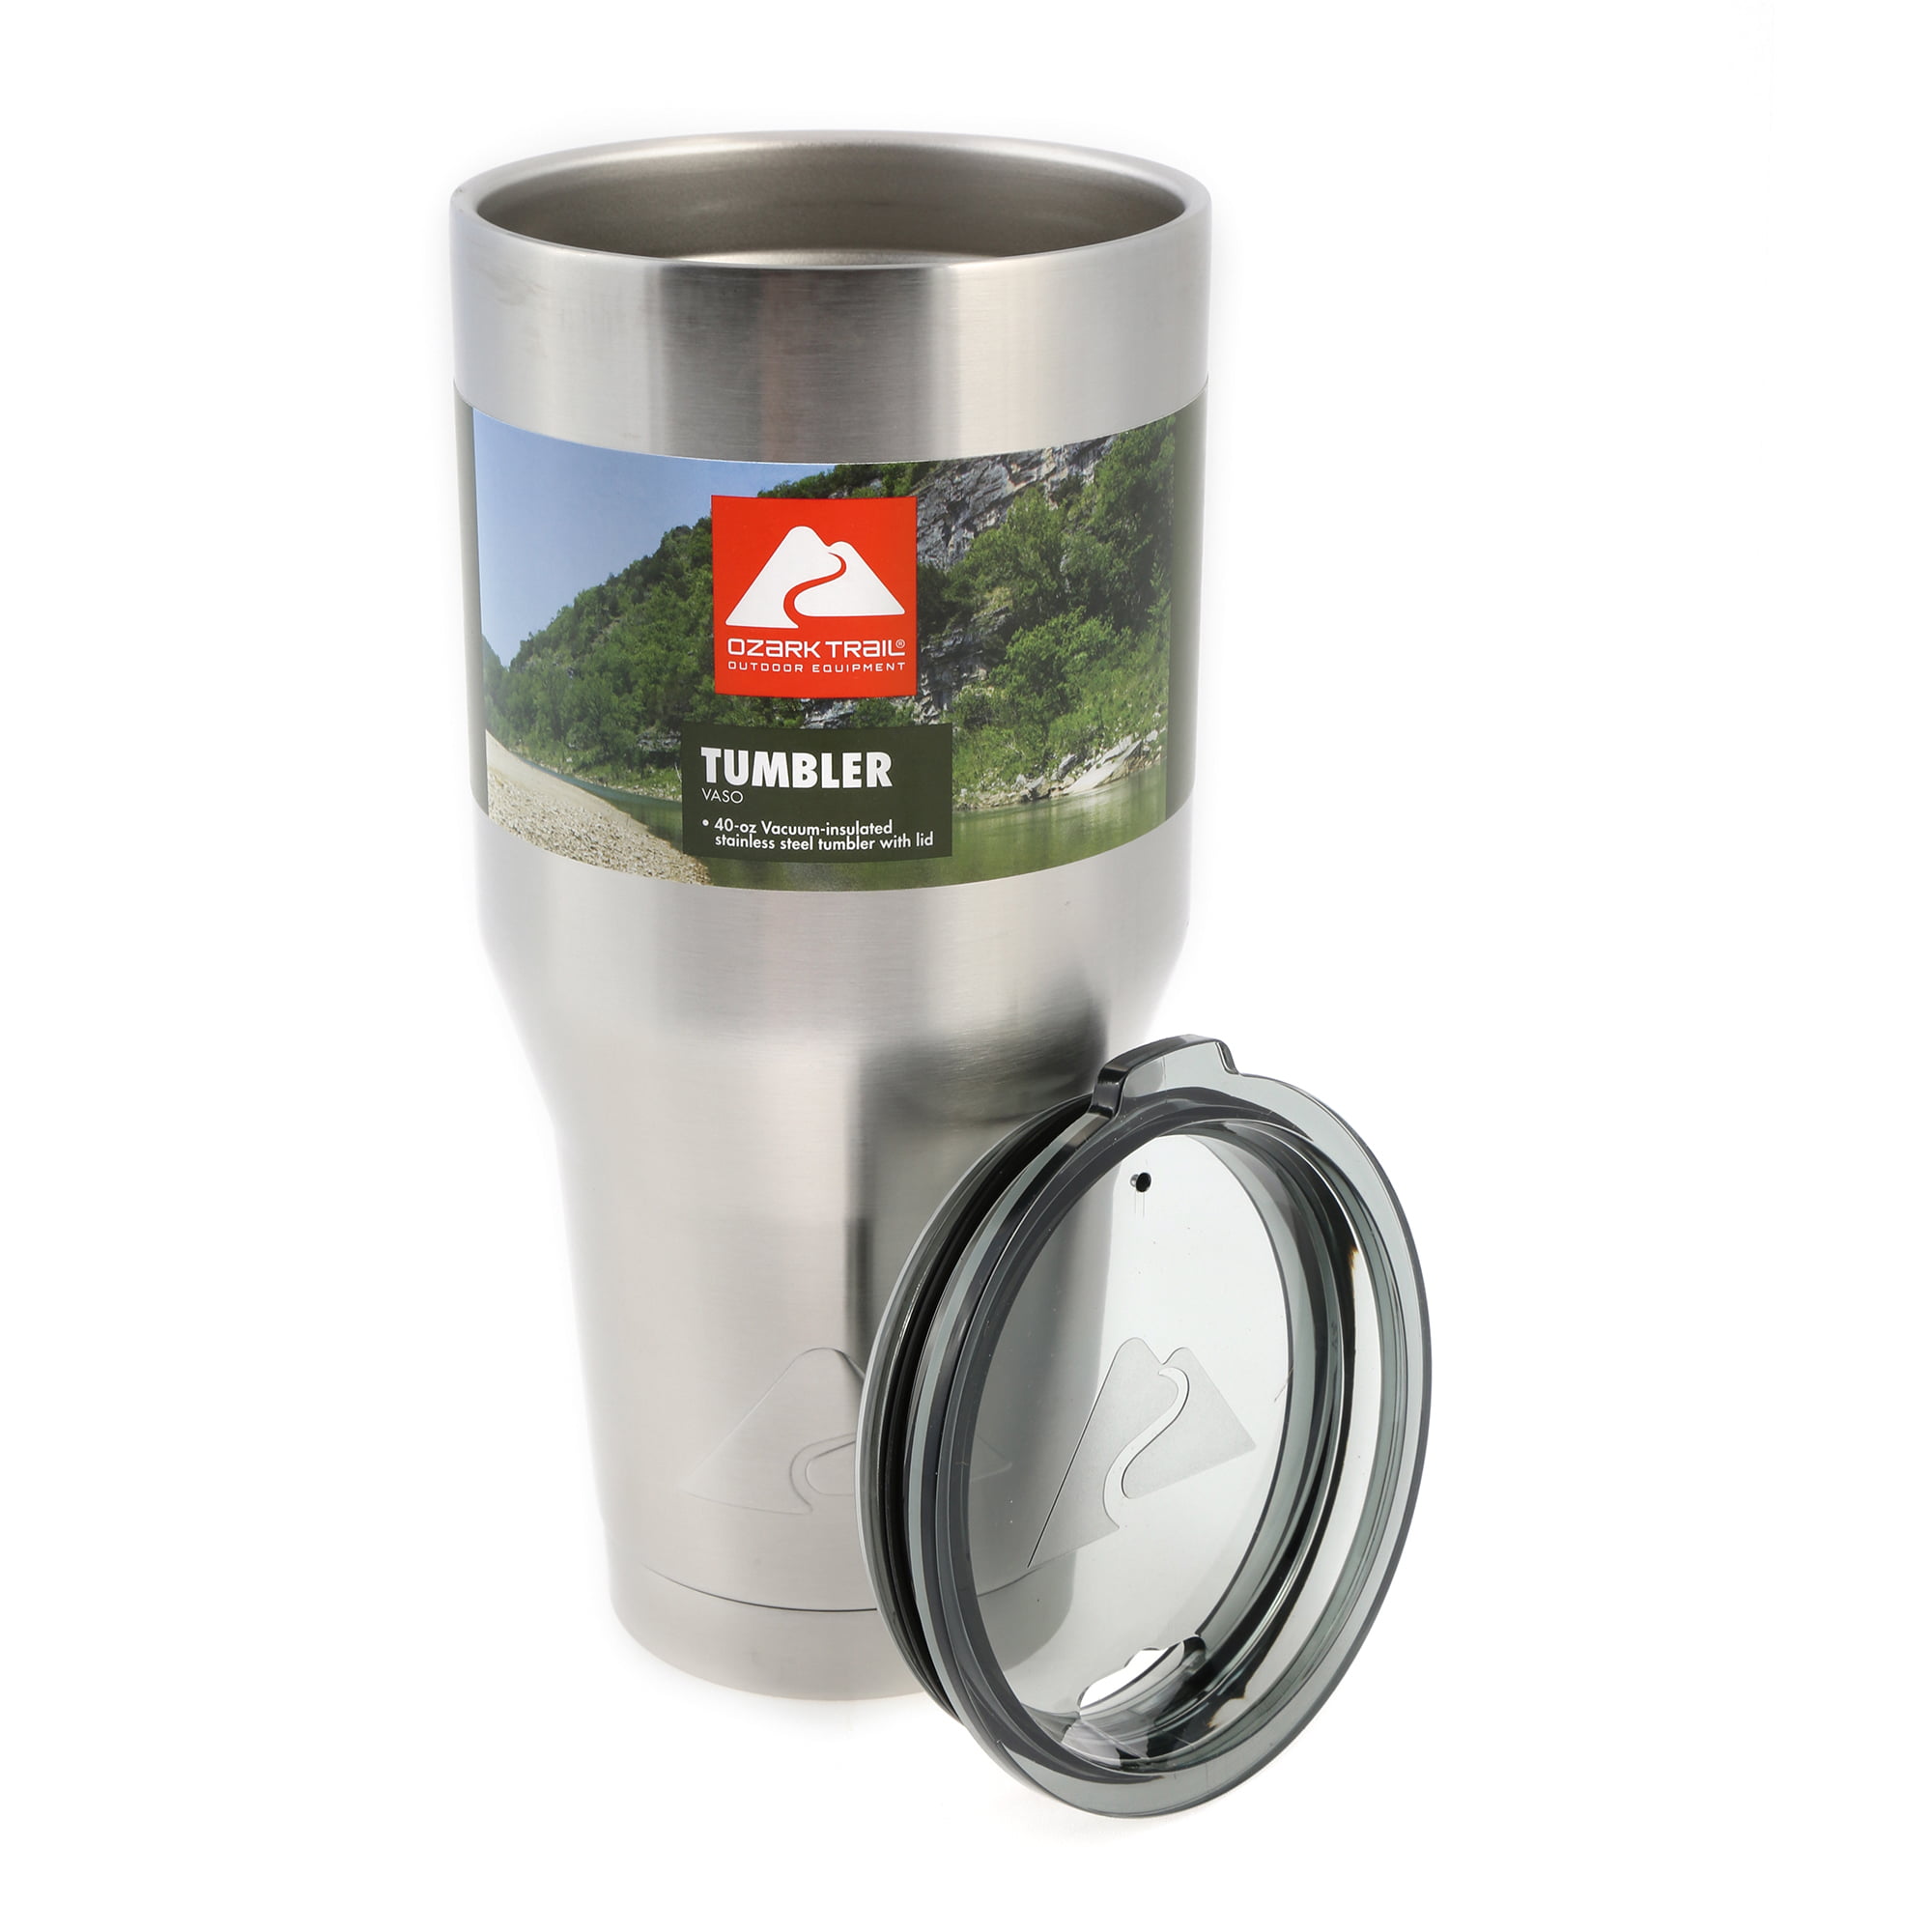 Ozark Trail 40 oz Double Wall Vacuum Insulated Stainless Steel Tumbler  Black 